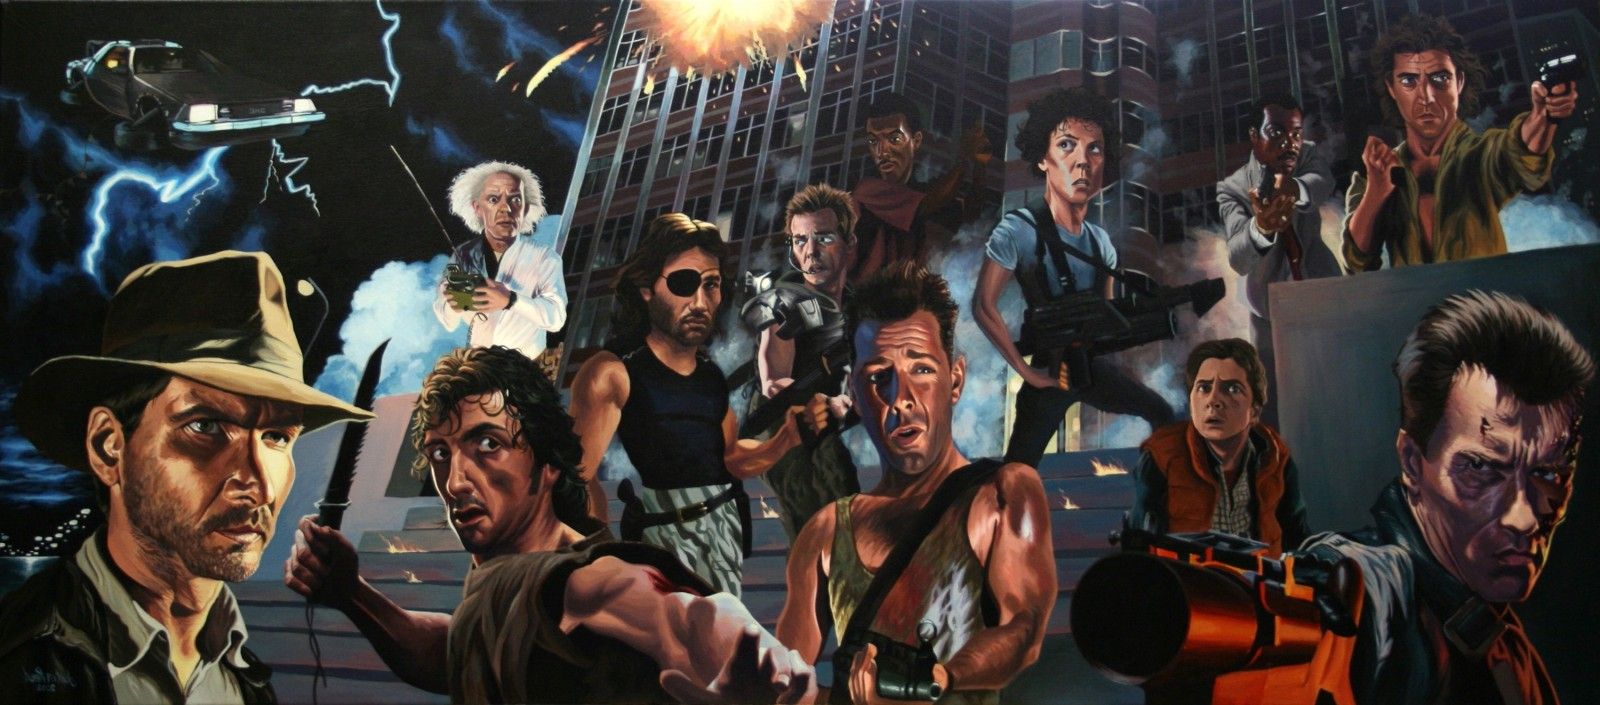 Wallpaper, 3000x1323 px, Alien movie, Back to the Future, caricature, Die Hard, Escape from New York, Hollywood, Indiana Jones, movies, Rambo, Terminator 3000x1323